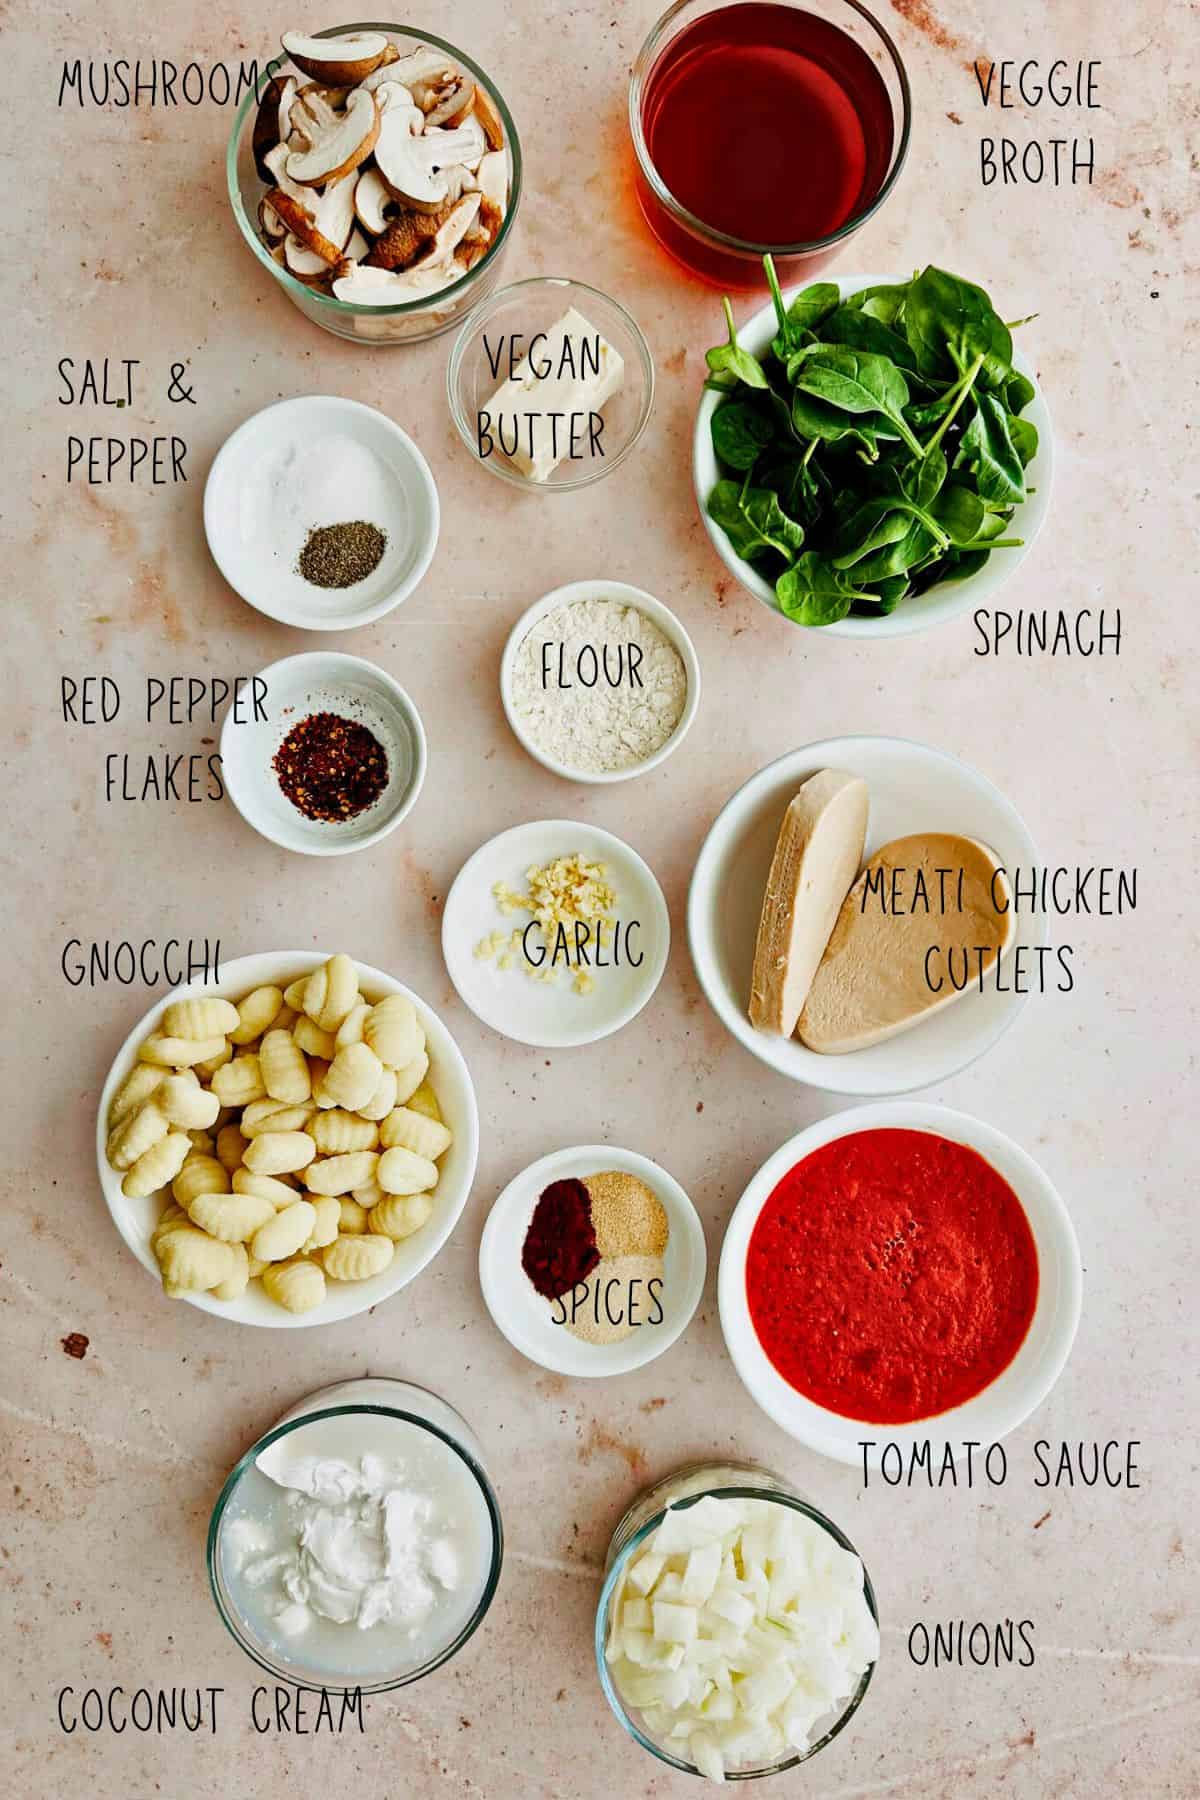 ingredients for Vegan One-Pot Creamy Tomato Gnocchi with Meati Chicken